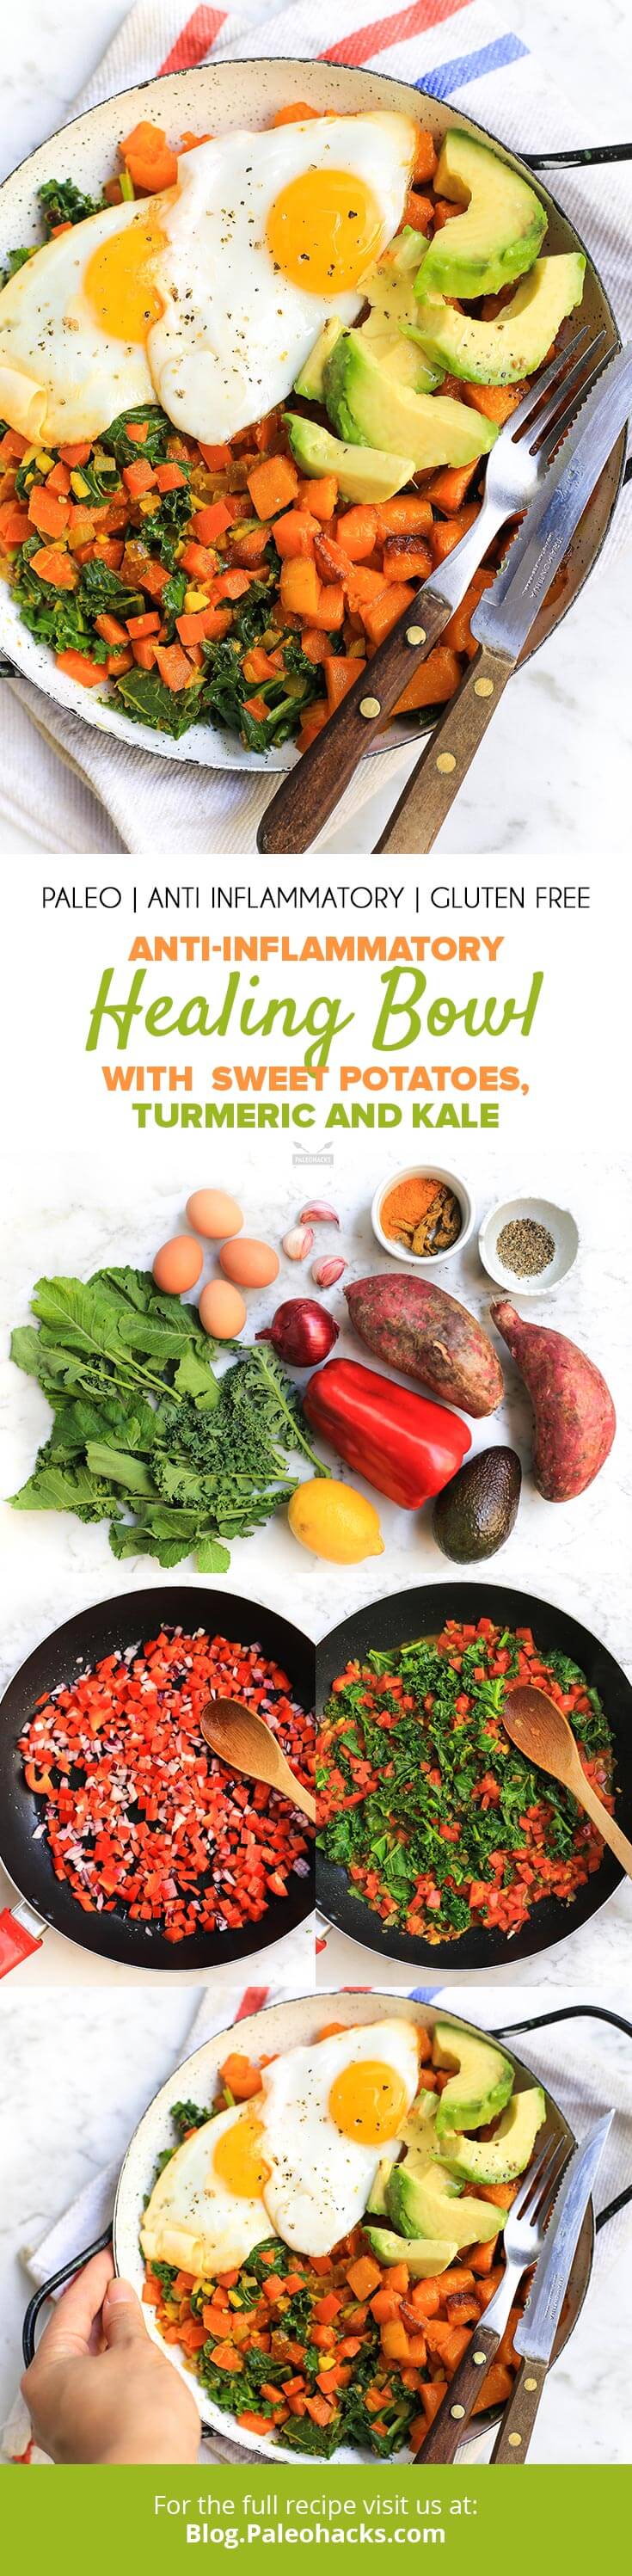 Dig into this super healthy healing bowl filled with vitamin-rich kale, sweet potato, eggs, avocado and anti-inflammatory turmeric!